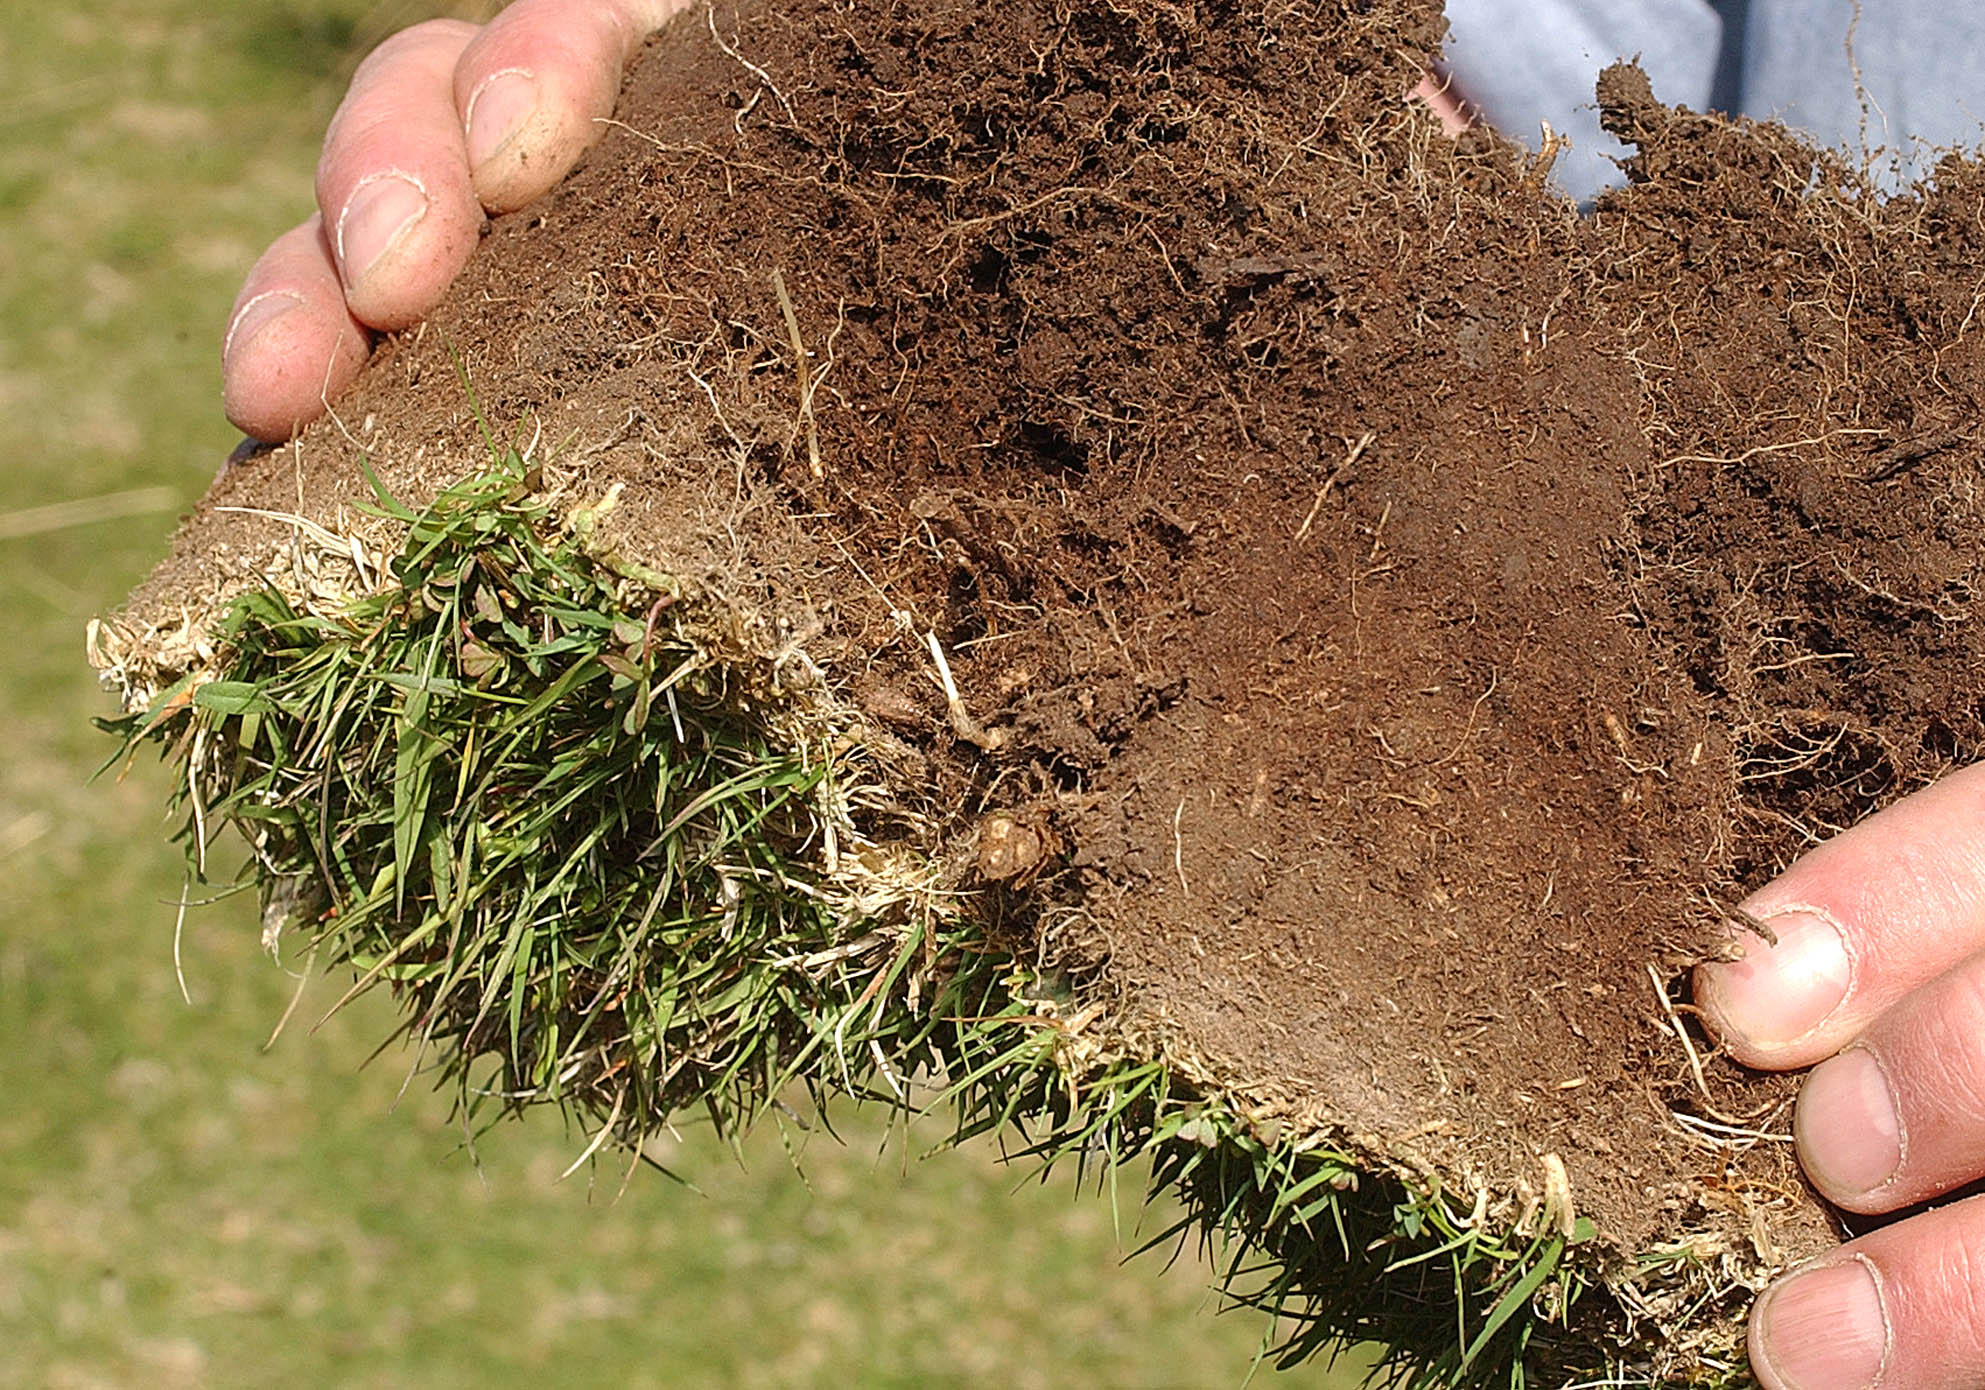 Pasture that has been treated with ThatchBusta, there is no layer of thatch and you can see the grass roots penetrate more deeply into the soil.